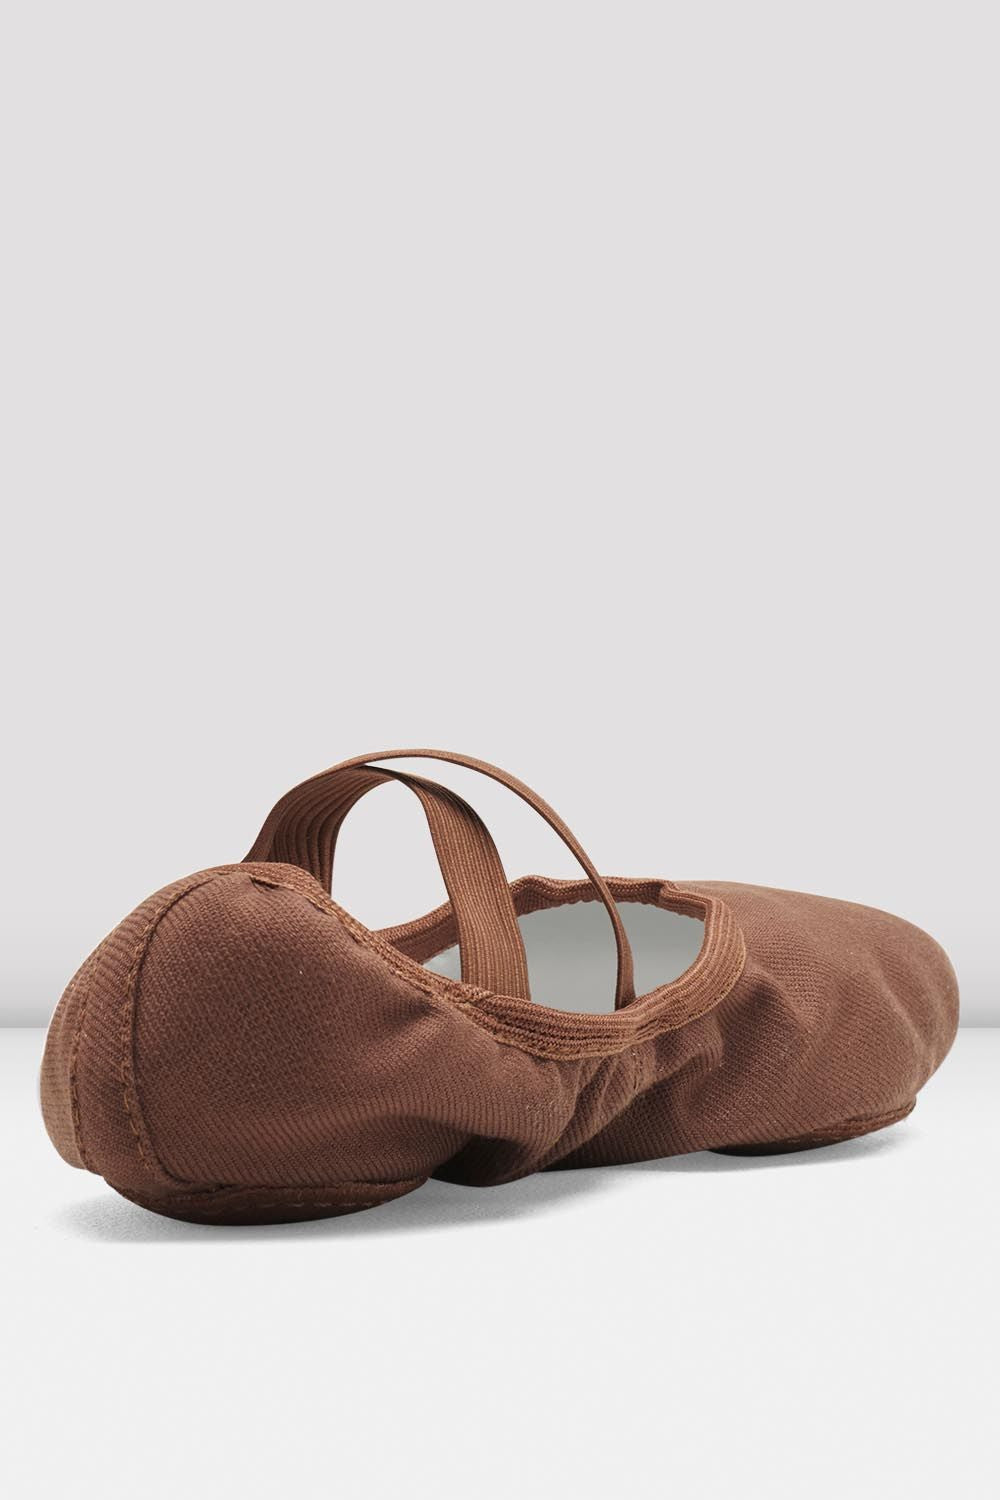 Ladies Performa Stretch Canvas Ballet Shoes, Cocoa – BLOCH Dance US